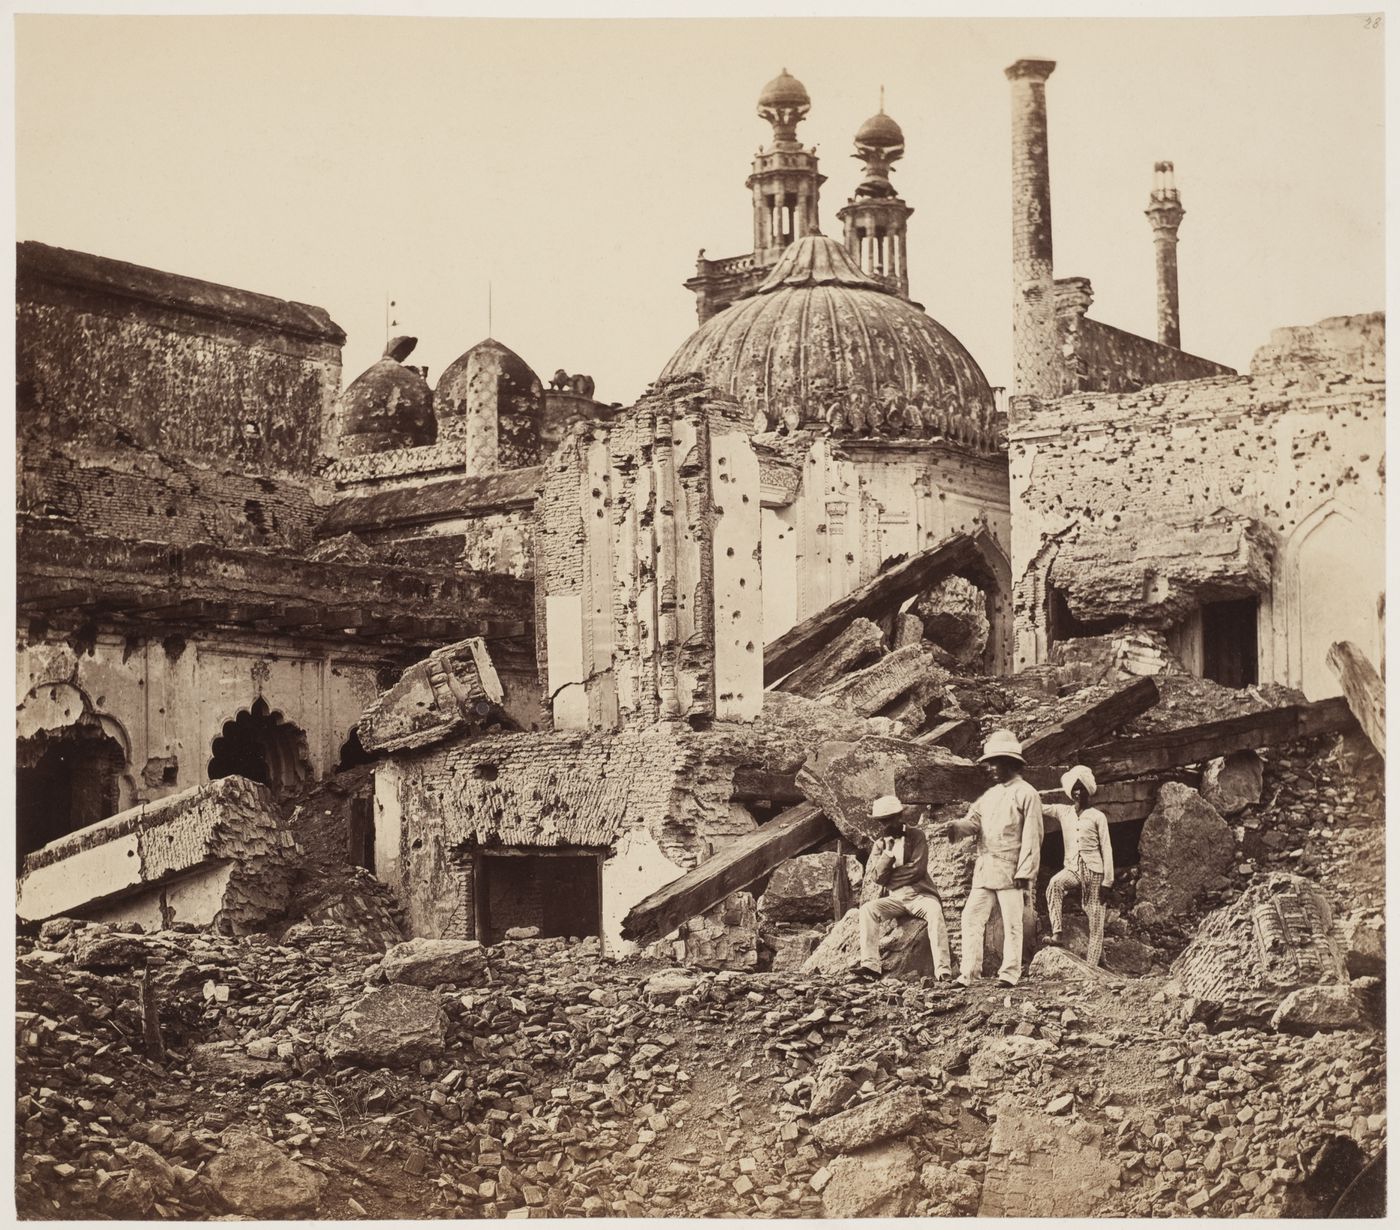 View of the ruins of the Chattar Manzil [Umbrella Palaces], Lucknow, India